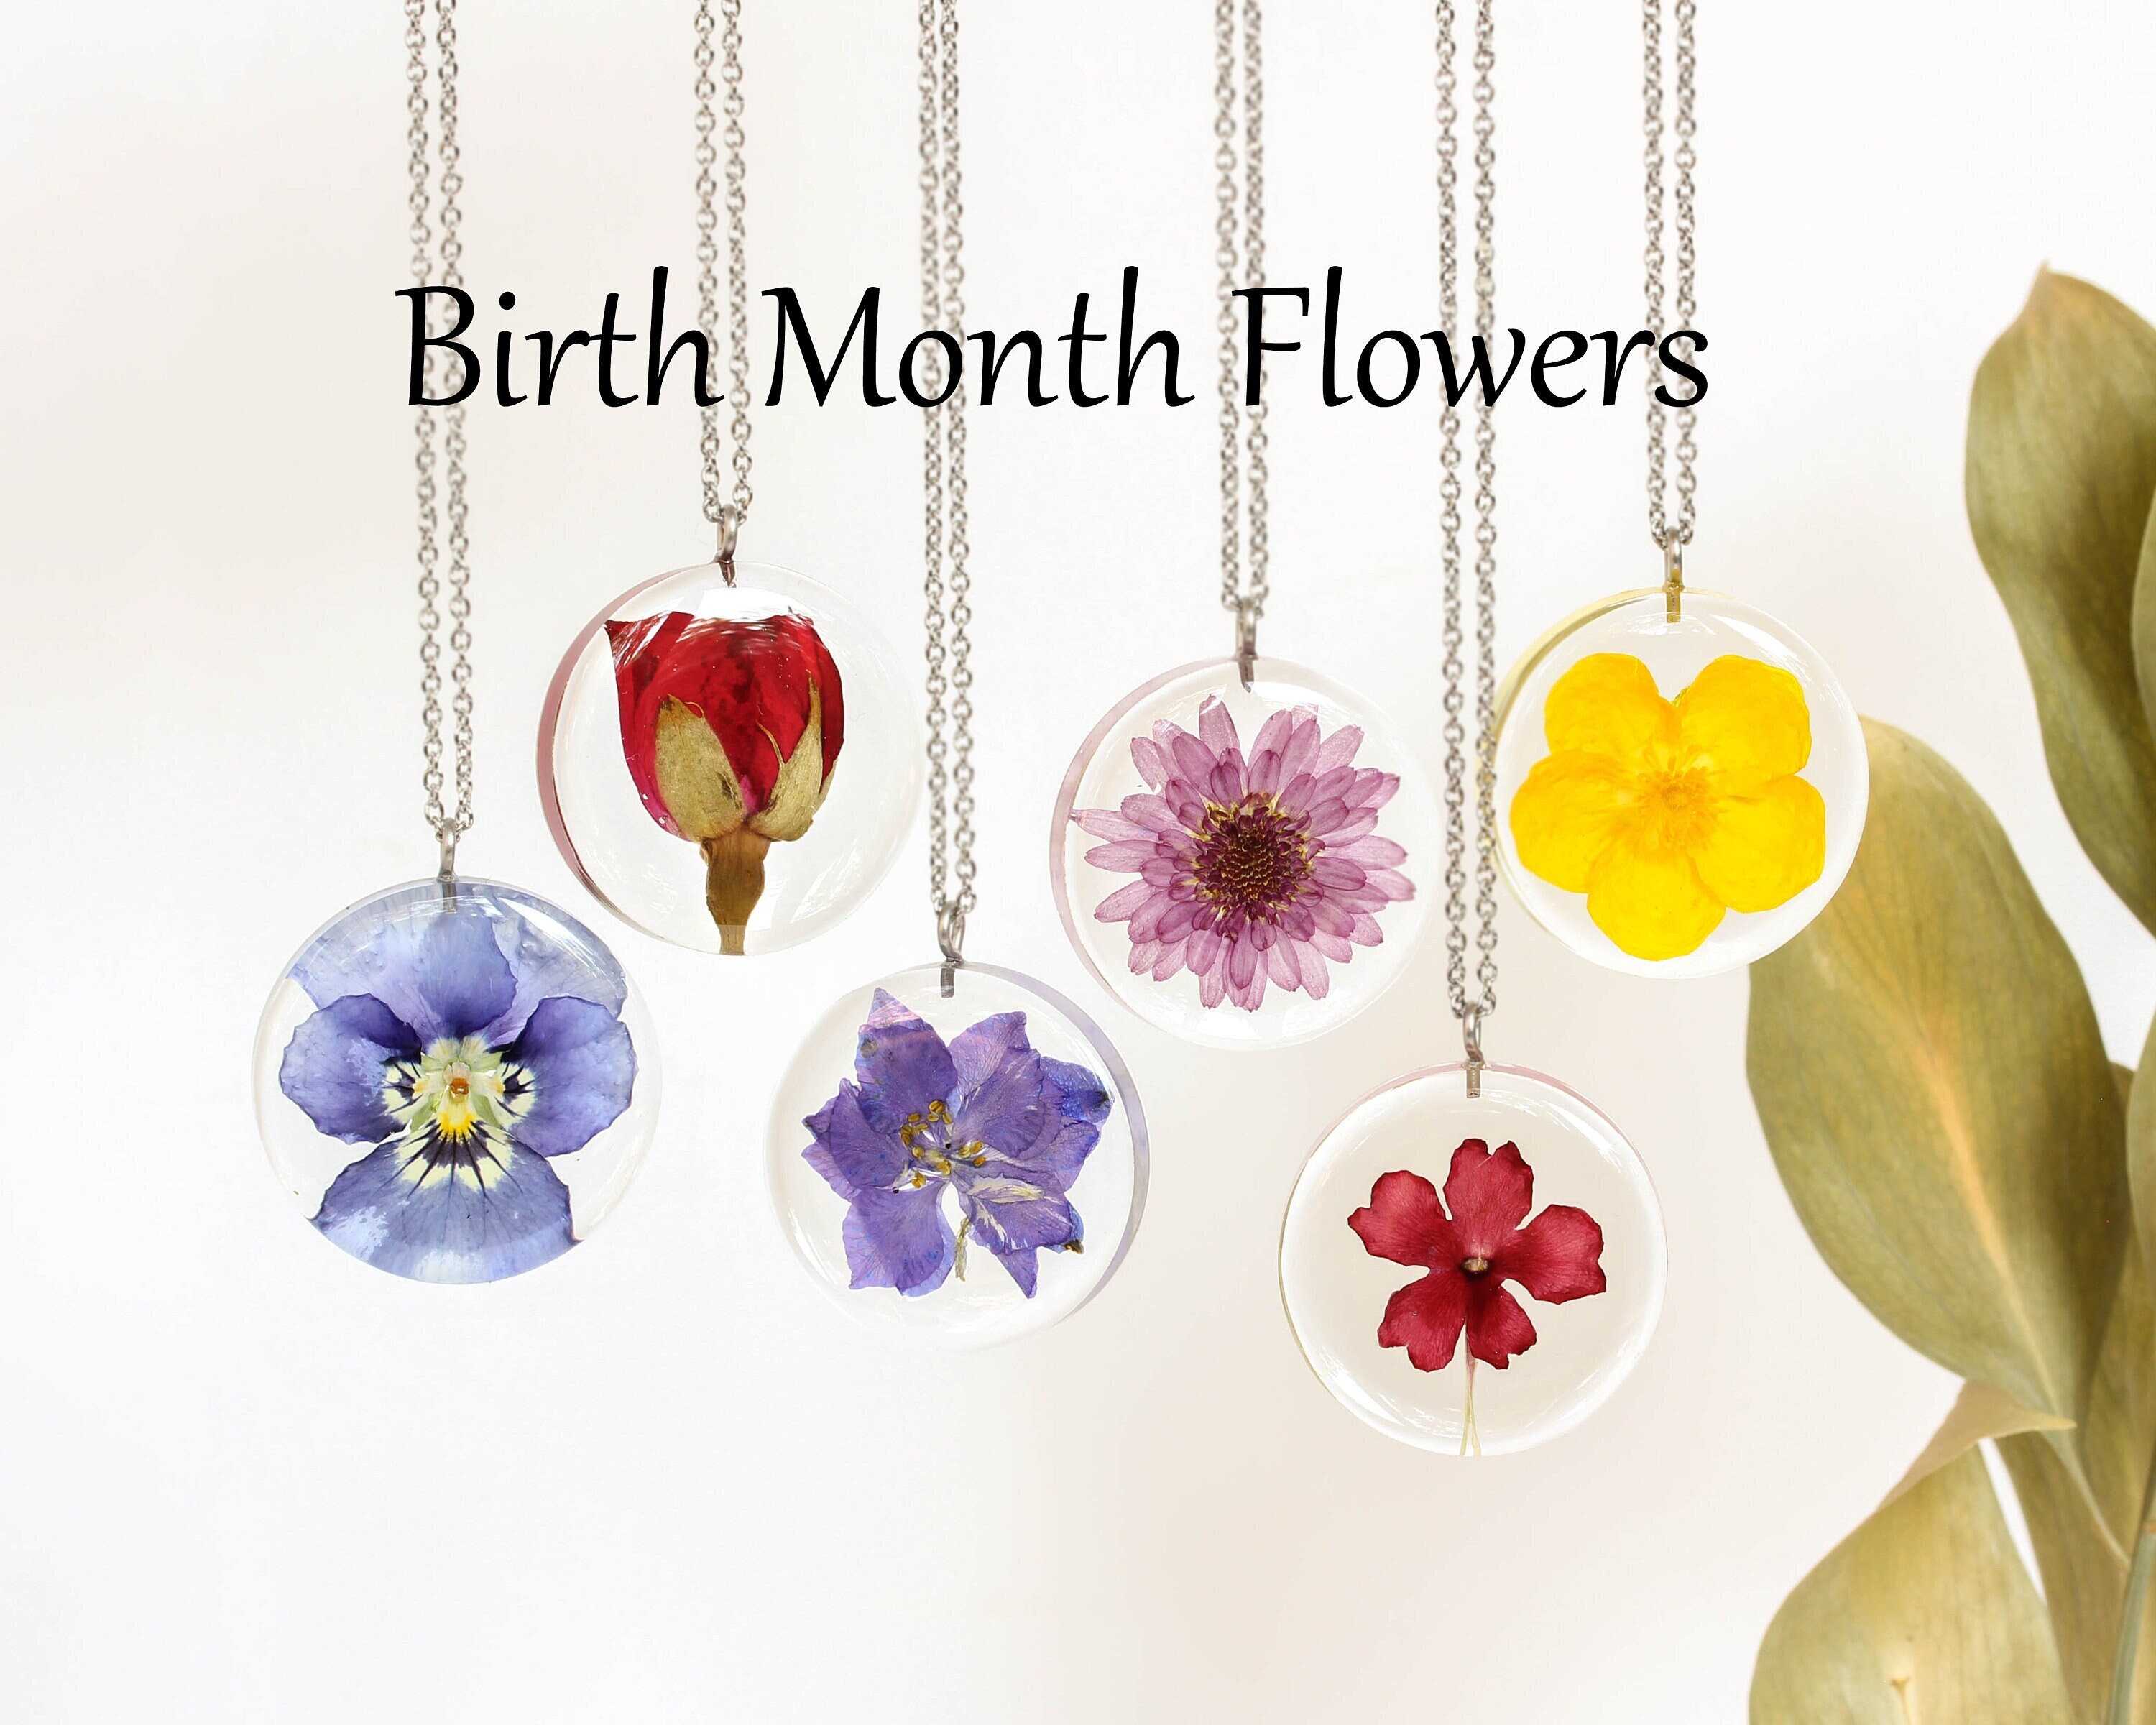 Combined Birth Flower Bouquet Necklace for Mother's Day, Birth Flower  Bouquet Necklace for Grandma, Family Necklace for Mom, Christmas Gift - Etsy